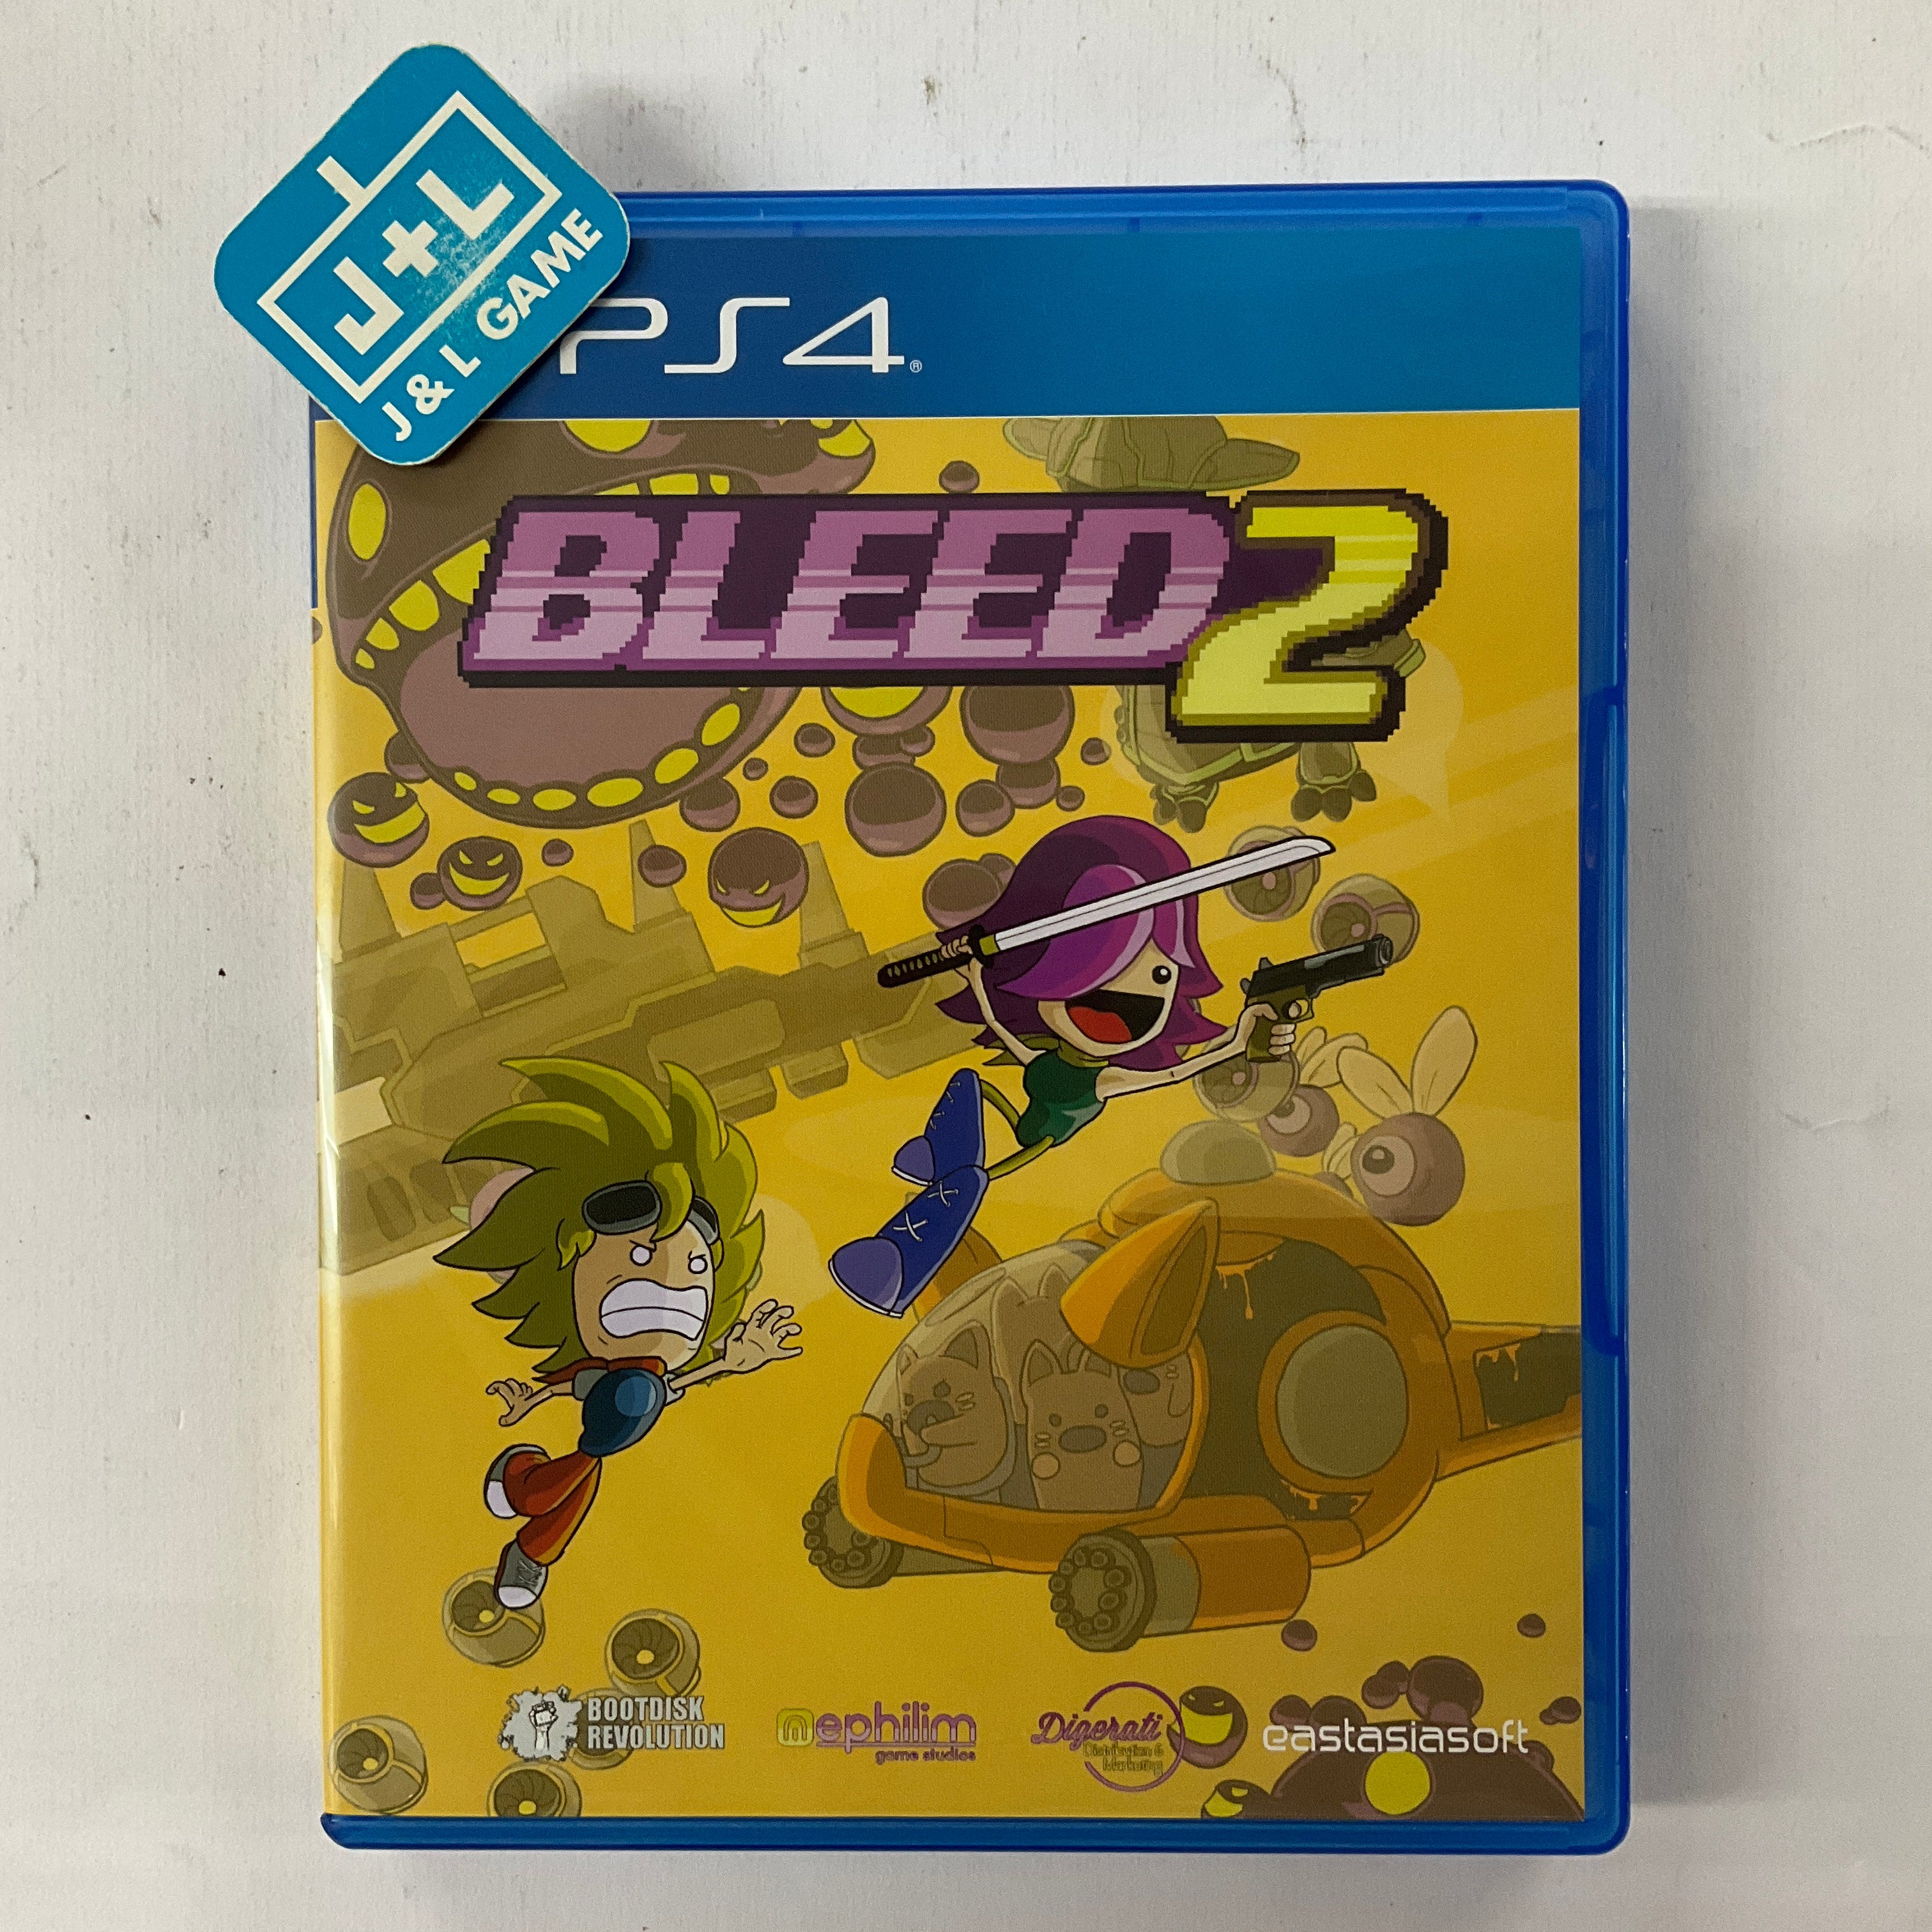 Bleed + Bleed 2 (Limited Edition) - (PS4) PlayStation 4 [Pre-Owned] (Asia Import) Video Games eastasiasoft   